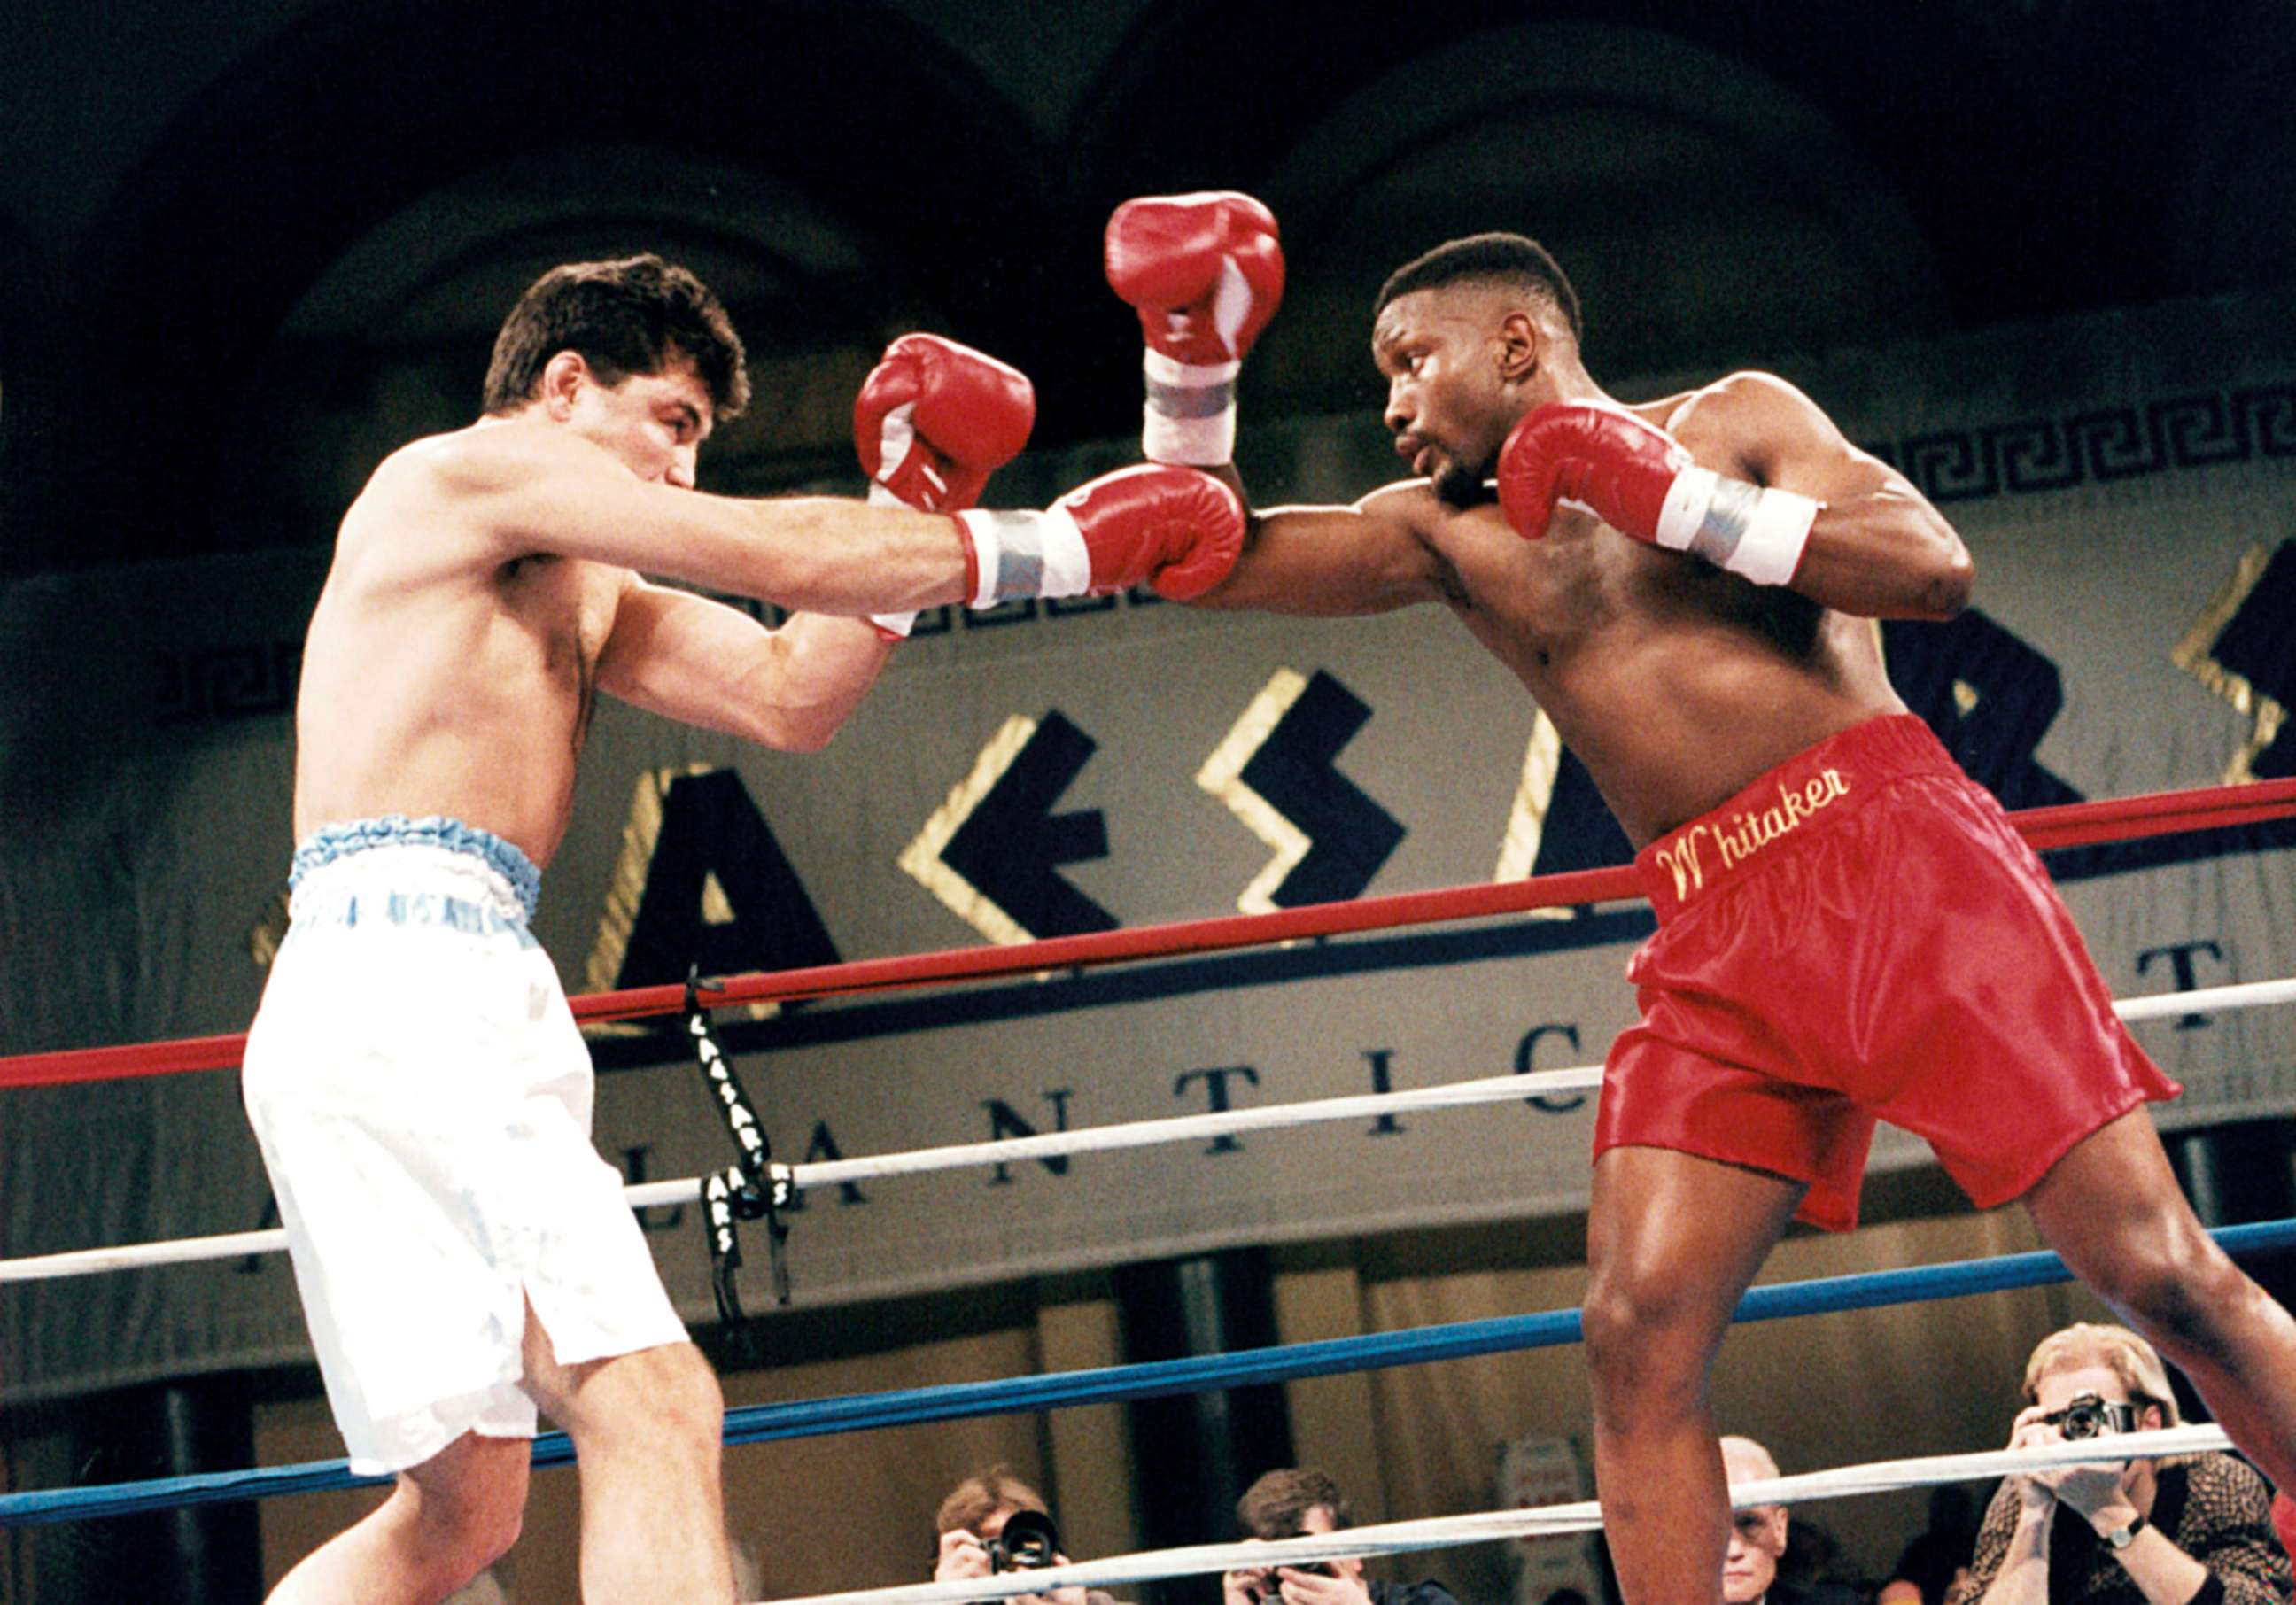 PHOTO: Pernell Whitaker (R) throws a right punch against Julio Cesar Vasquez during the fight at the Convention Center, on March 4,1995, in Atlantic City, New Jersey. Pernell Whitaker won the WBA World light middleweight title by a UD 12.
